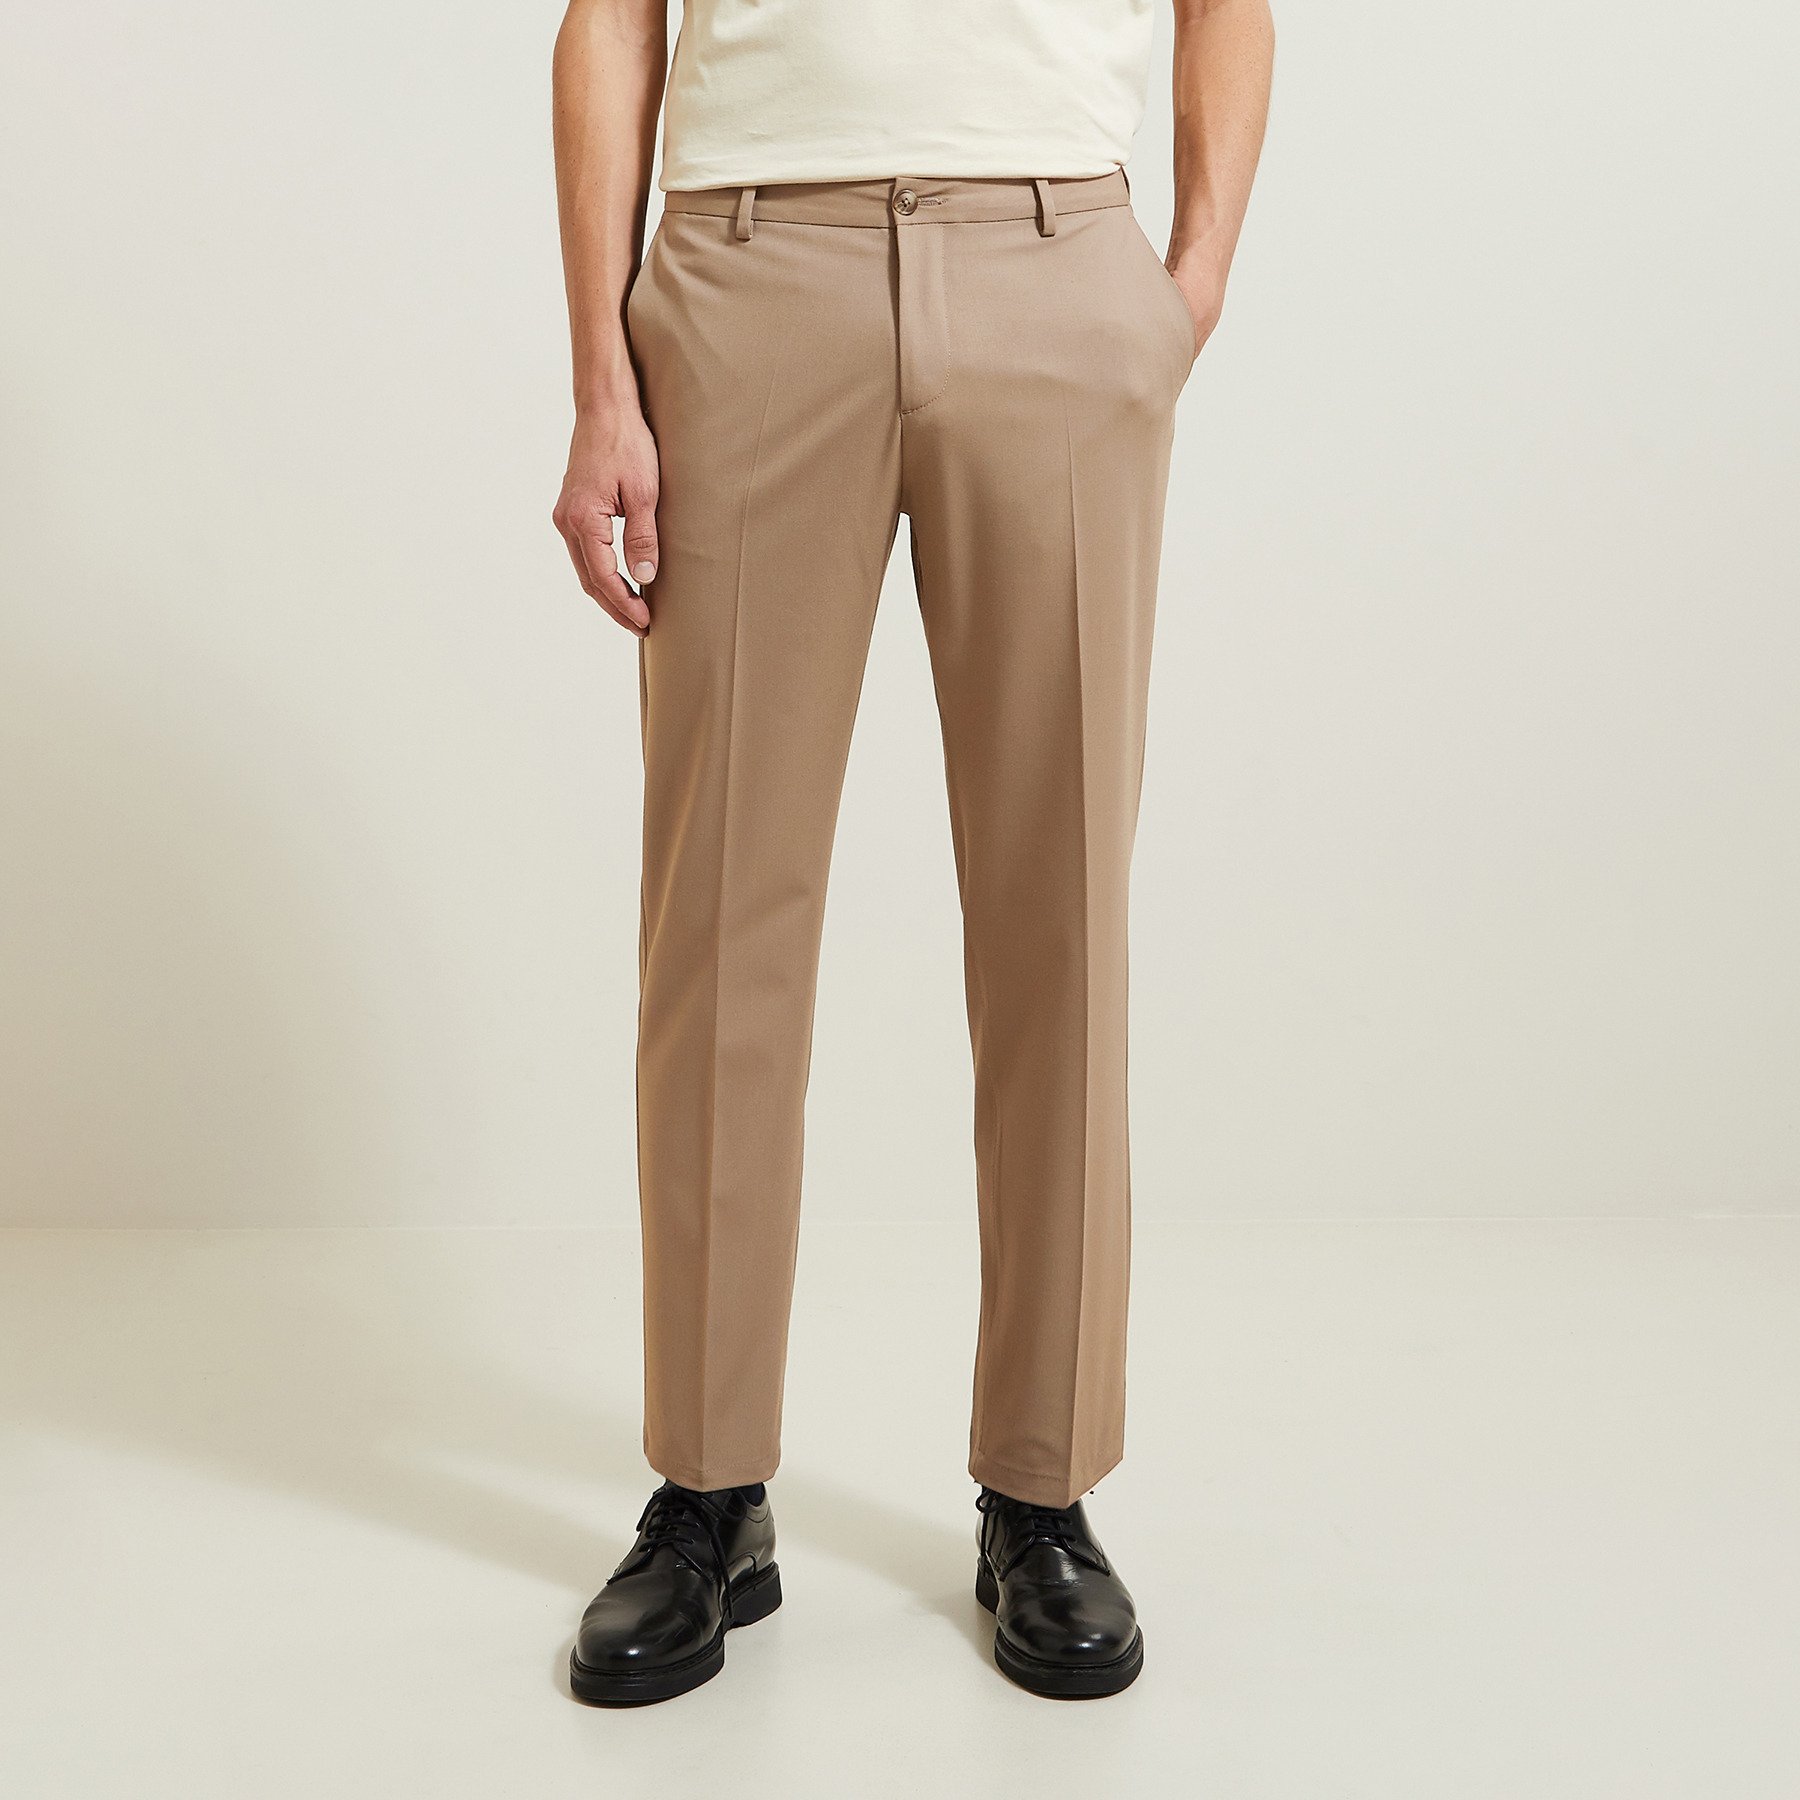 Pantalon chino large contient du polyester recyclé Beige 36 63% Polyester, 31% Viscose, 6% Elasthanne Homme Jules